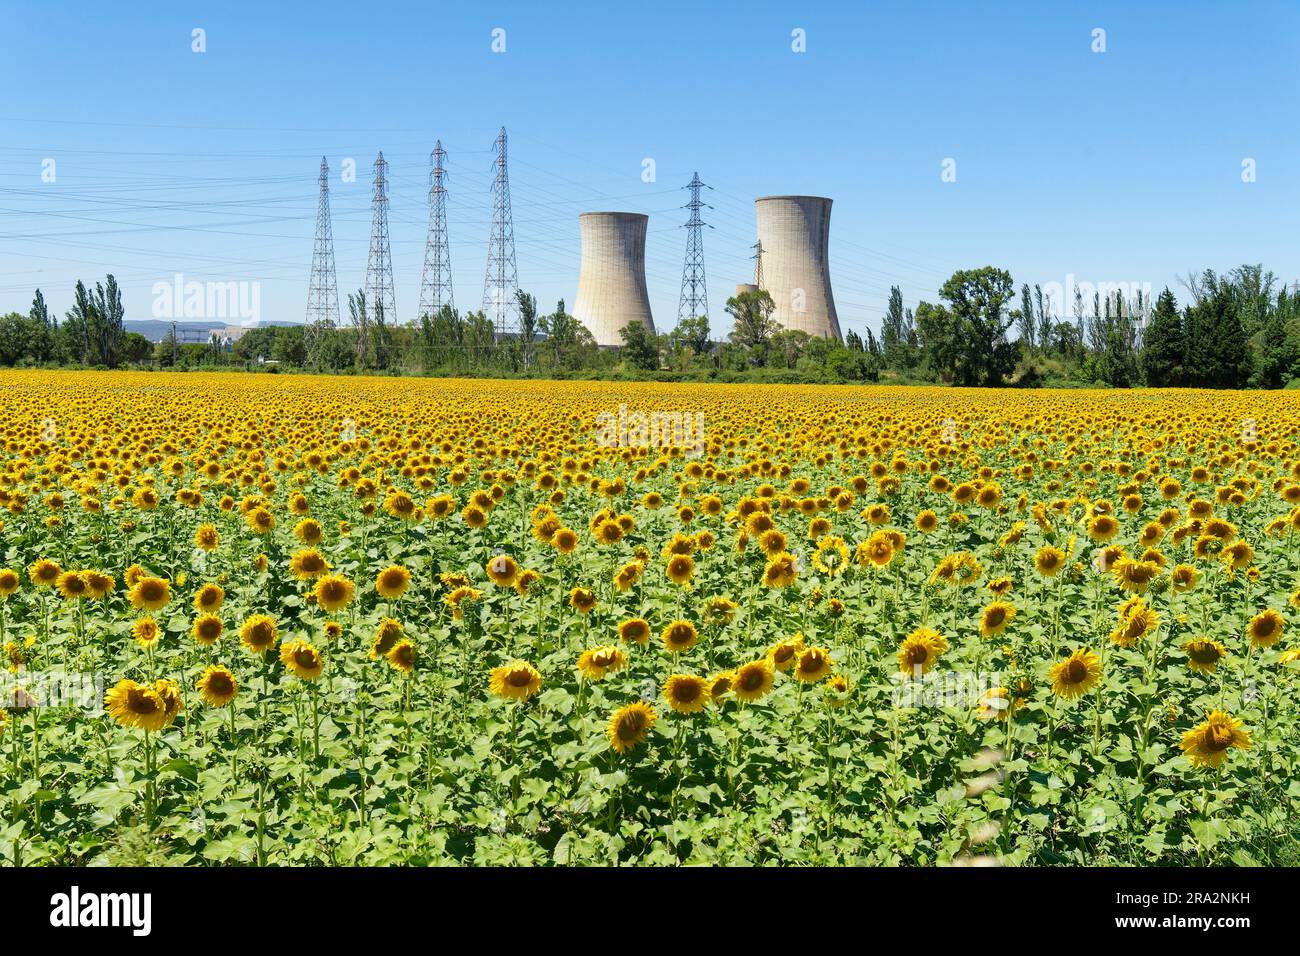 France, Vaucluse, Bollene, Tricastin industrial site in the Rhone Valley Stock Photo